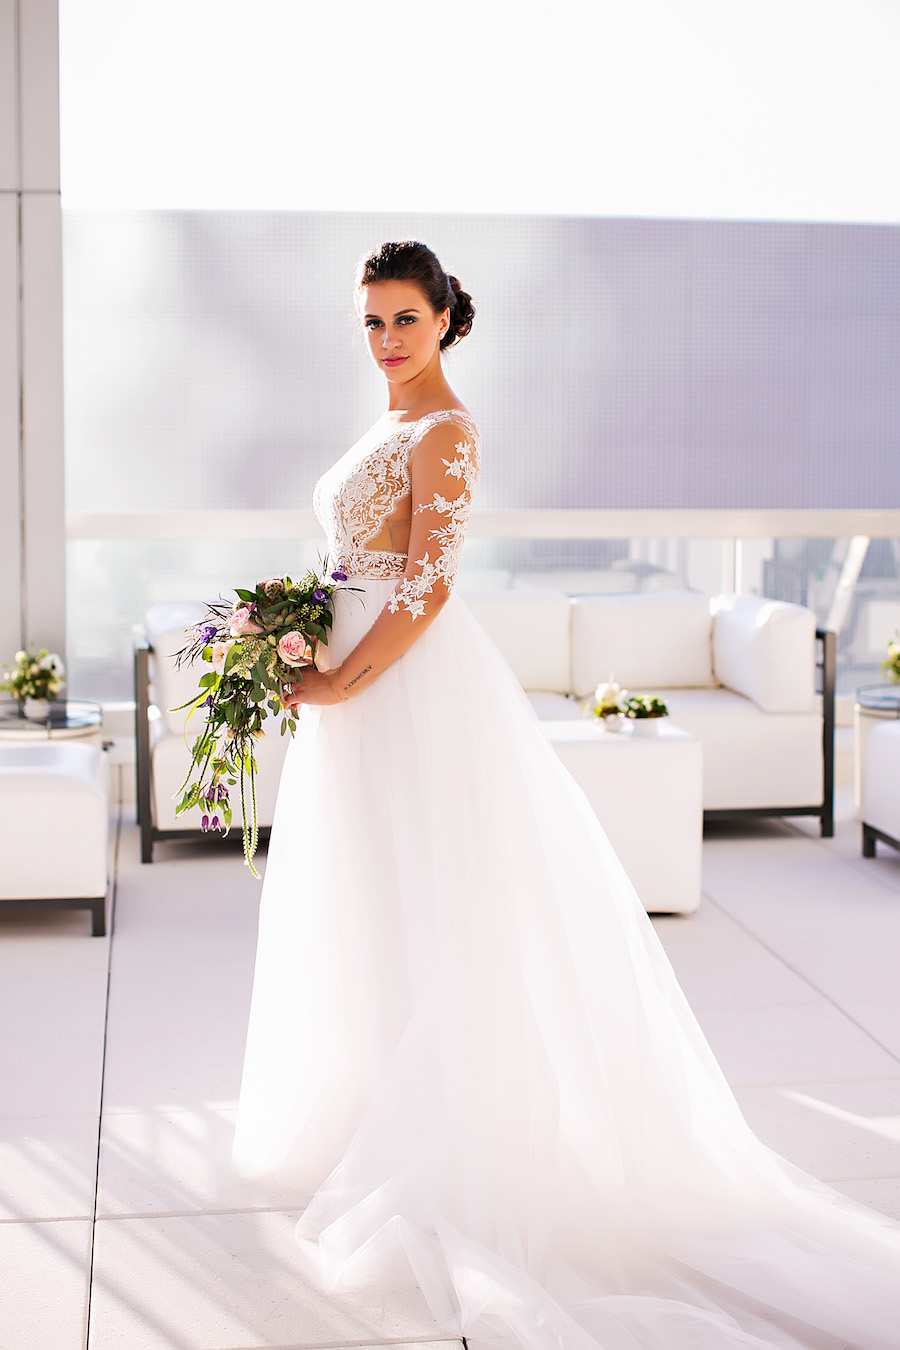 Rooftop Bridal Portrait in Nude Illusion Lace Wedding Dress with Sleeves with White Lounge Furniture | Tampa Bay Bridal Shop Isabel O'Neil Bridal | Wedding Photographer Limelight Photography | Downtown Tampa Venue Glazer's Children Museum | Rental and Decor Company A Chair Affair